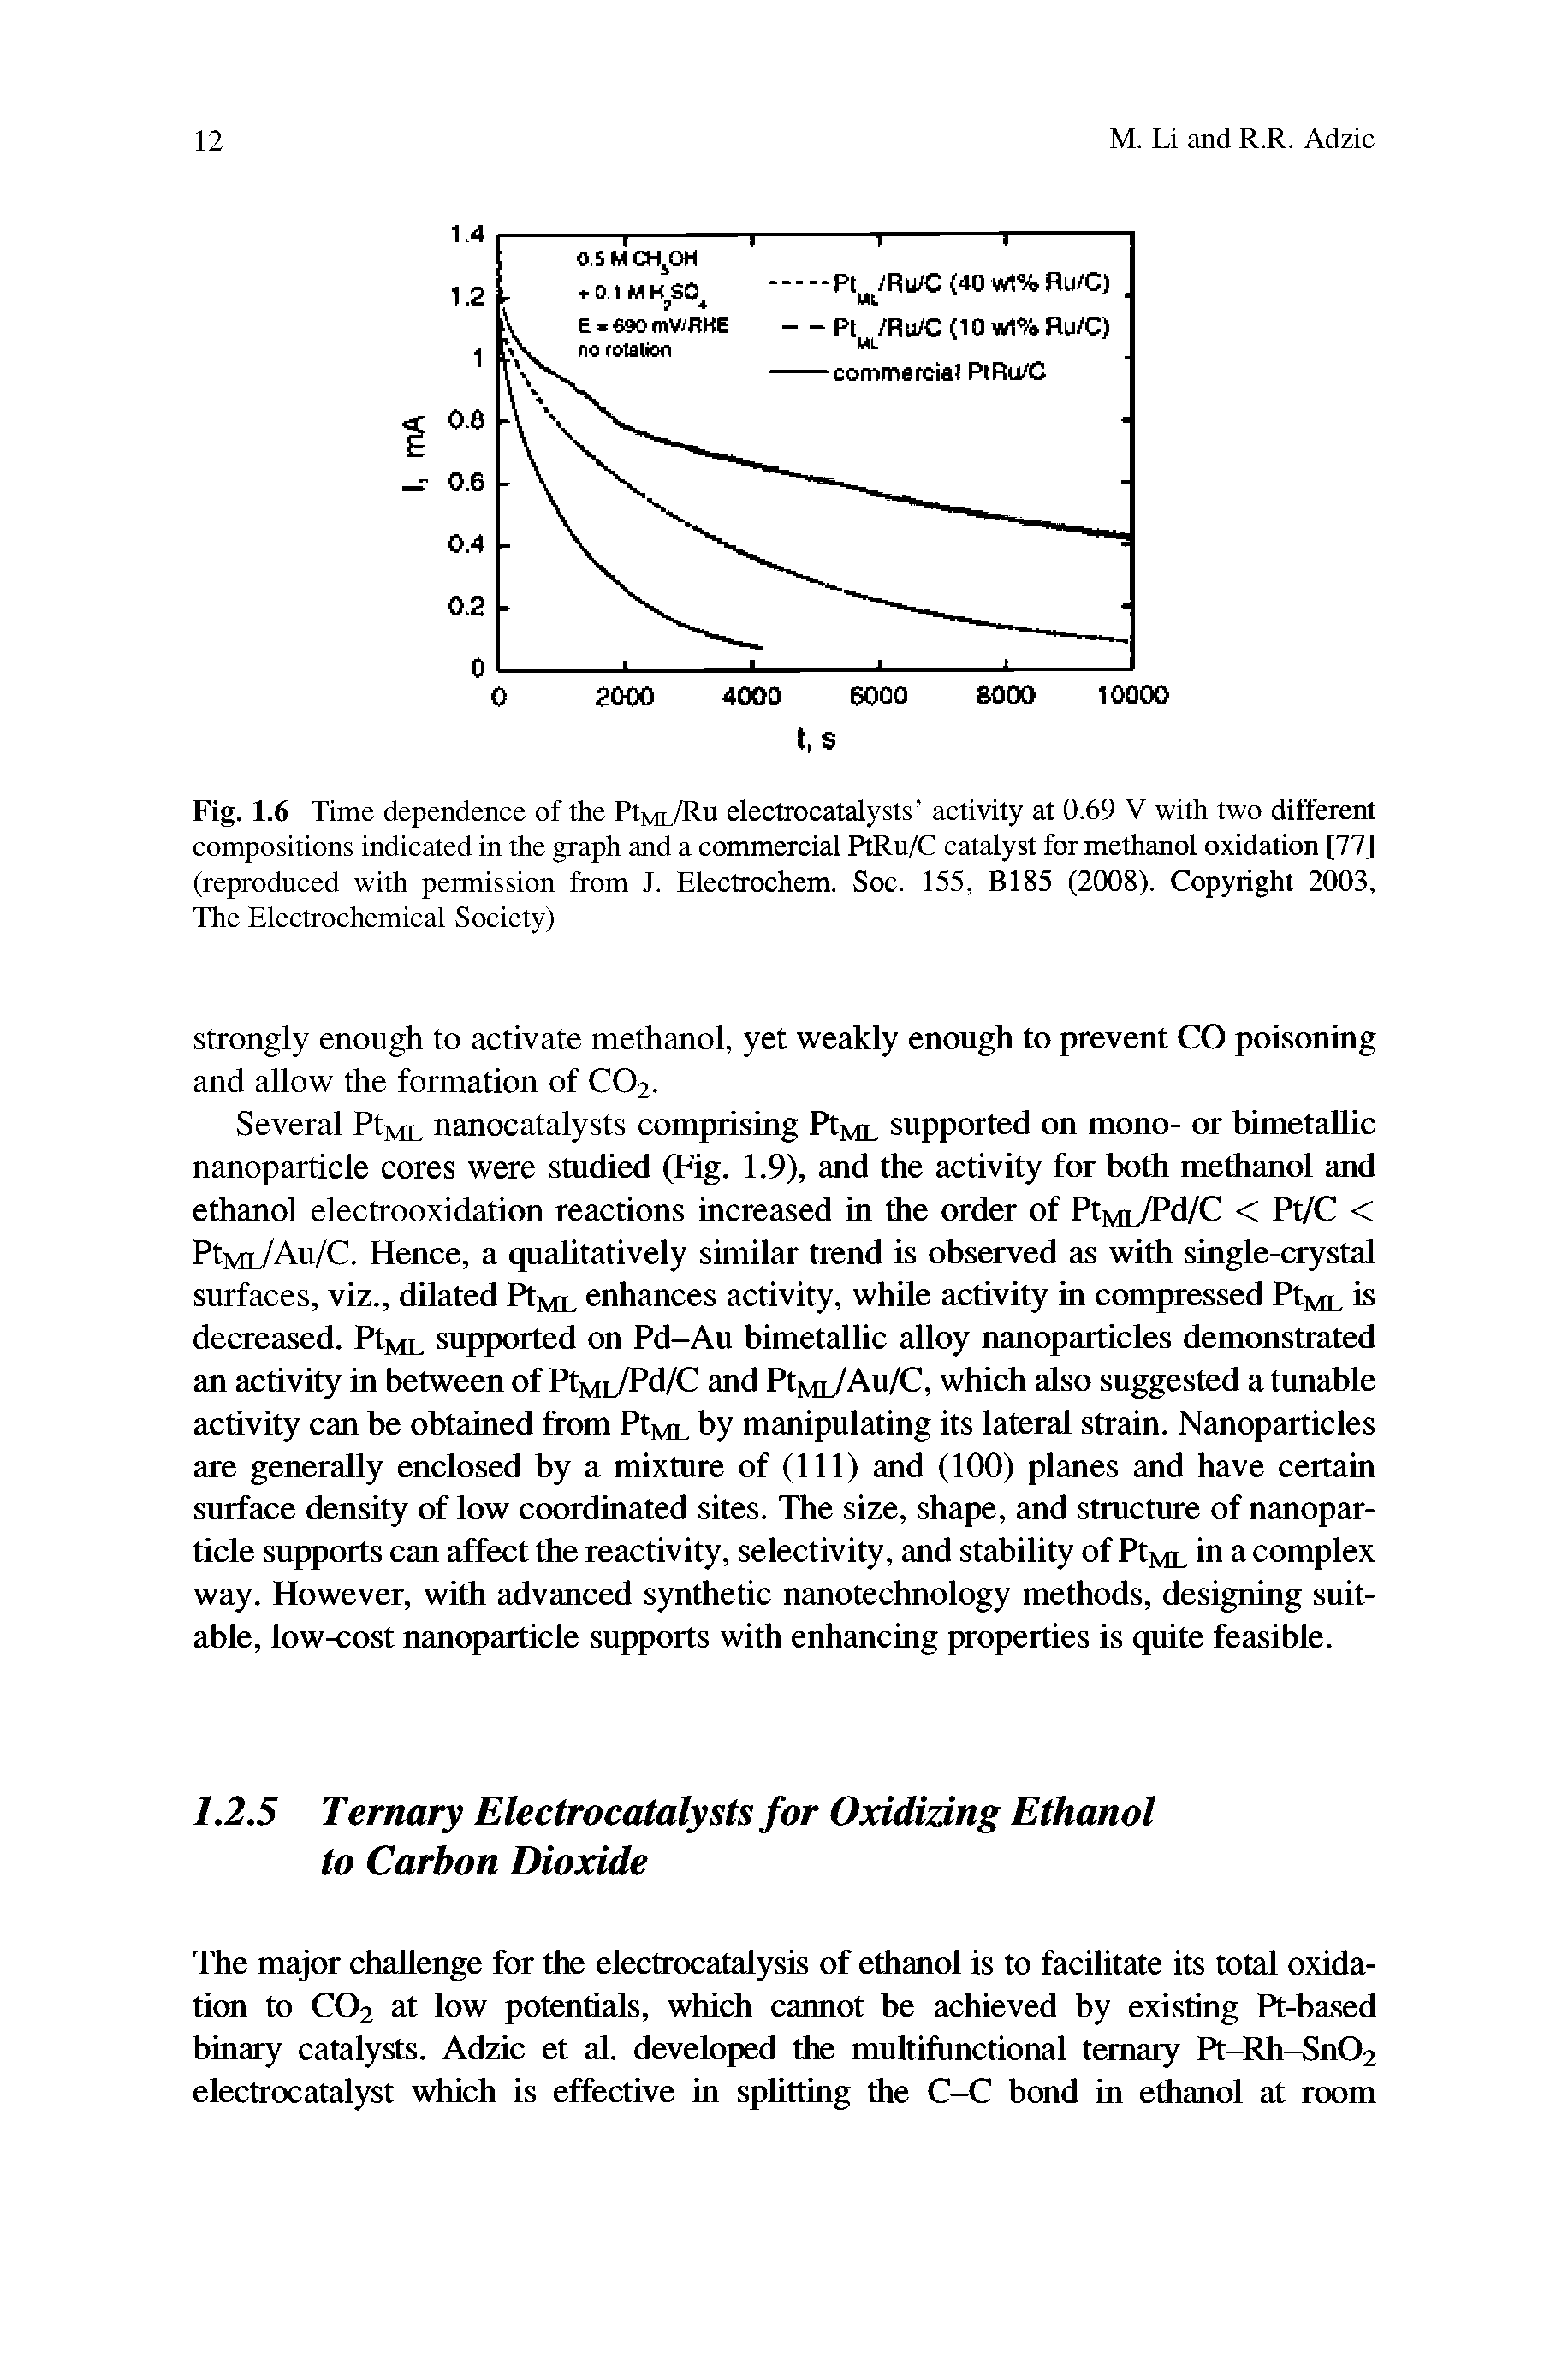 Fig. 1.6 Time dependence of the PIml/Ru electrocatalysts activity at 0.69 V with two different compositions indicated in the graph and a commercial PtRu/C catalyst for methanol oxidation [77] (reproduced with permission from J. Electrochem. Soc. 155, B185 (2008). Copyright 2003, The Electrochemical Society)...